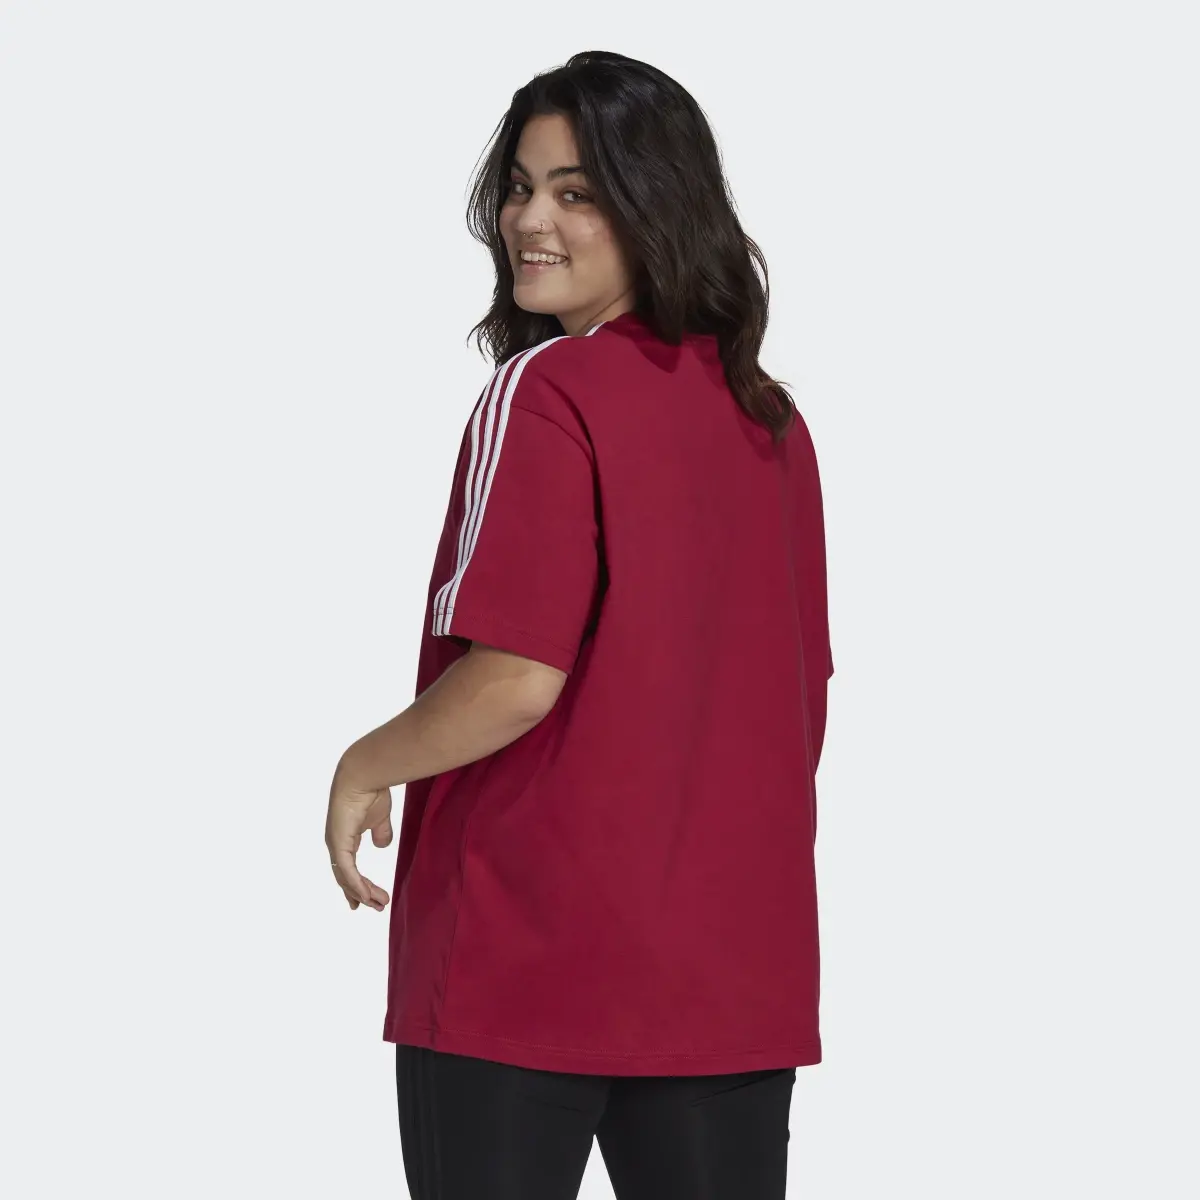 Adidas Centre Stage Tee (Plus Size). 3